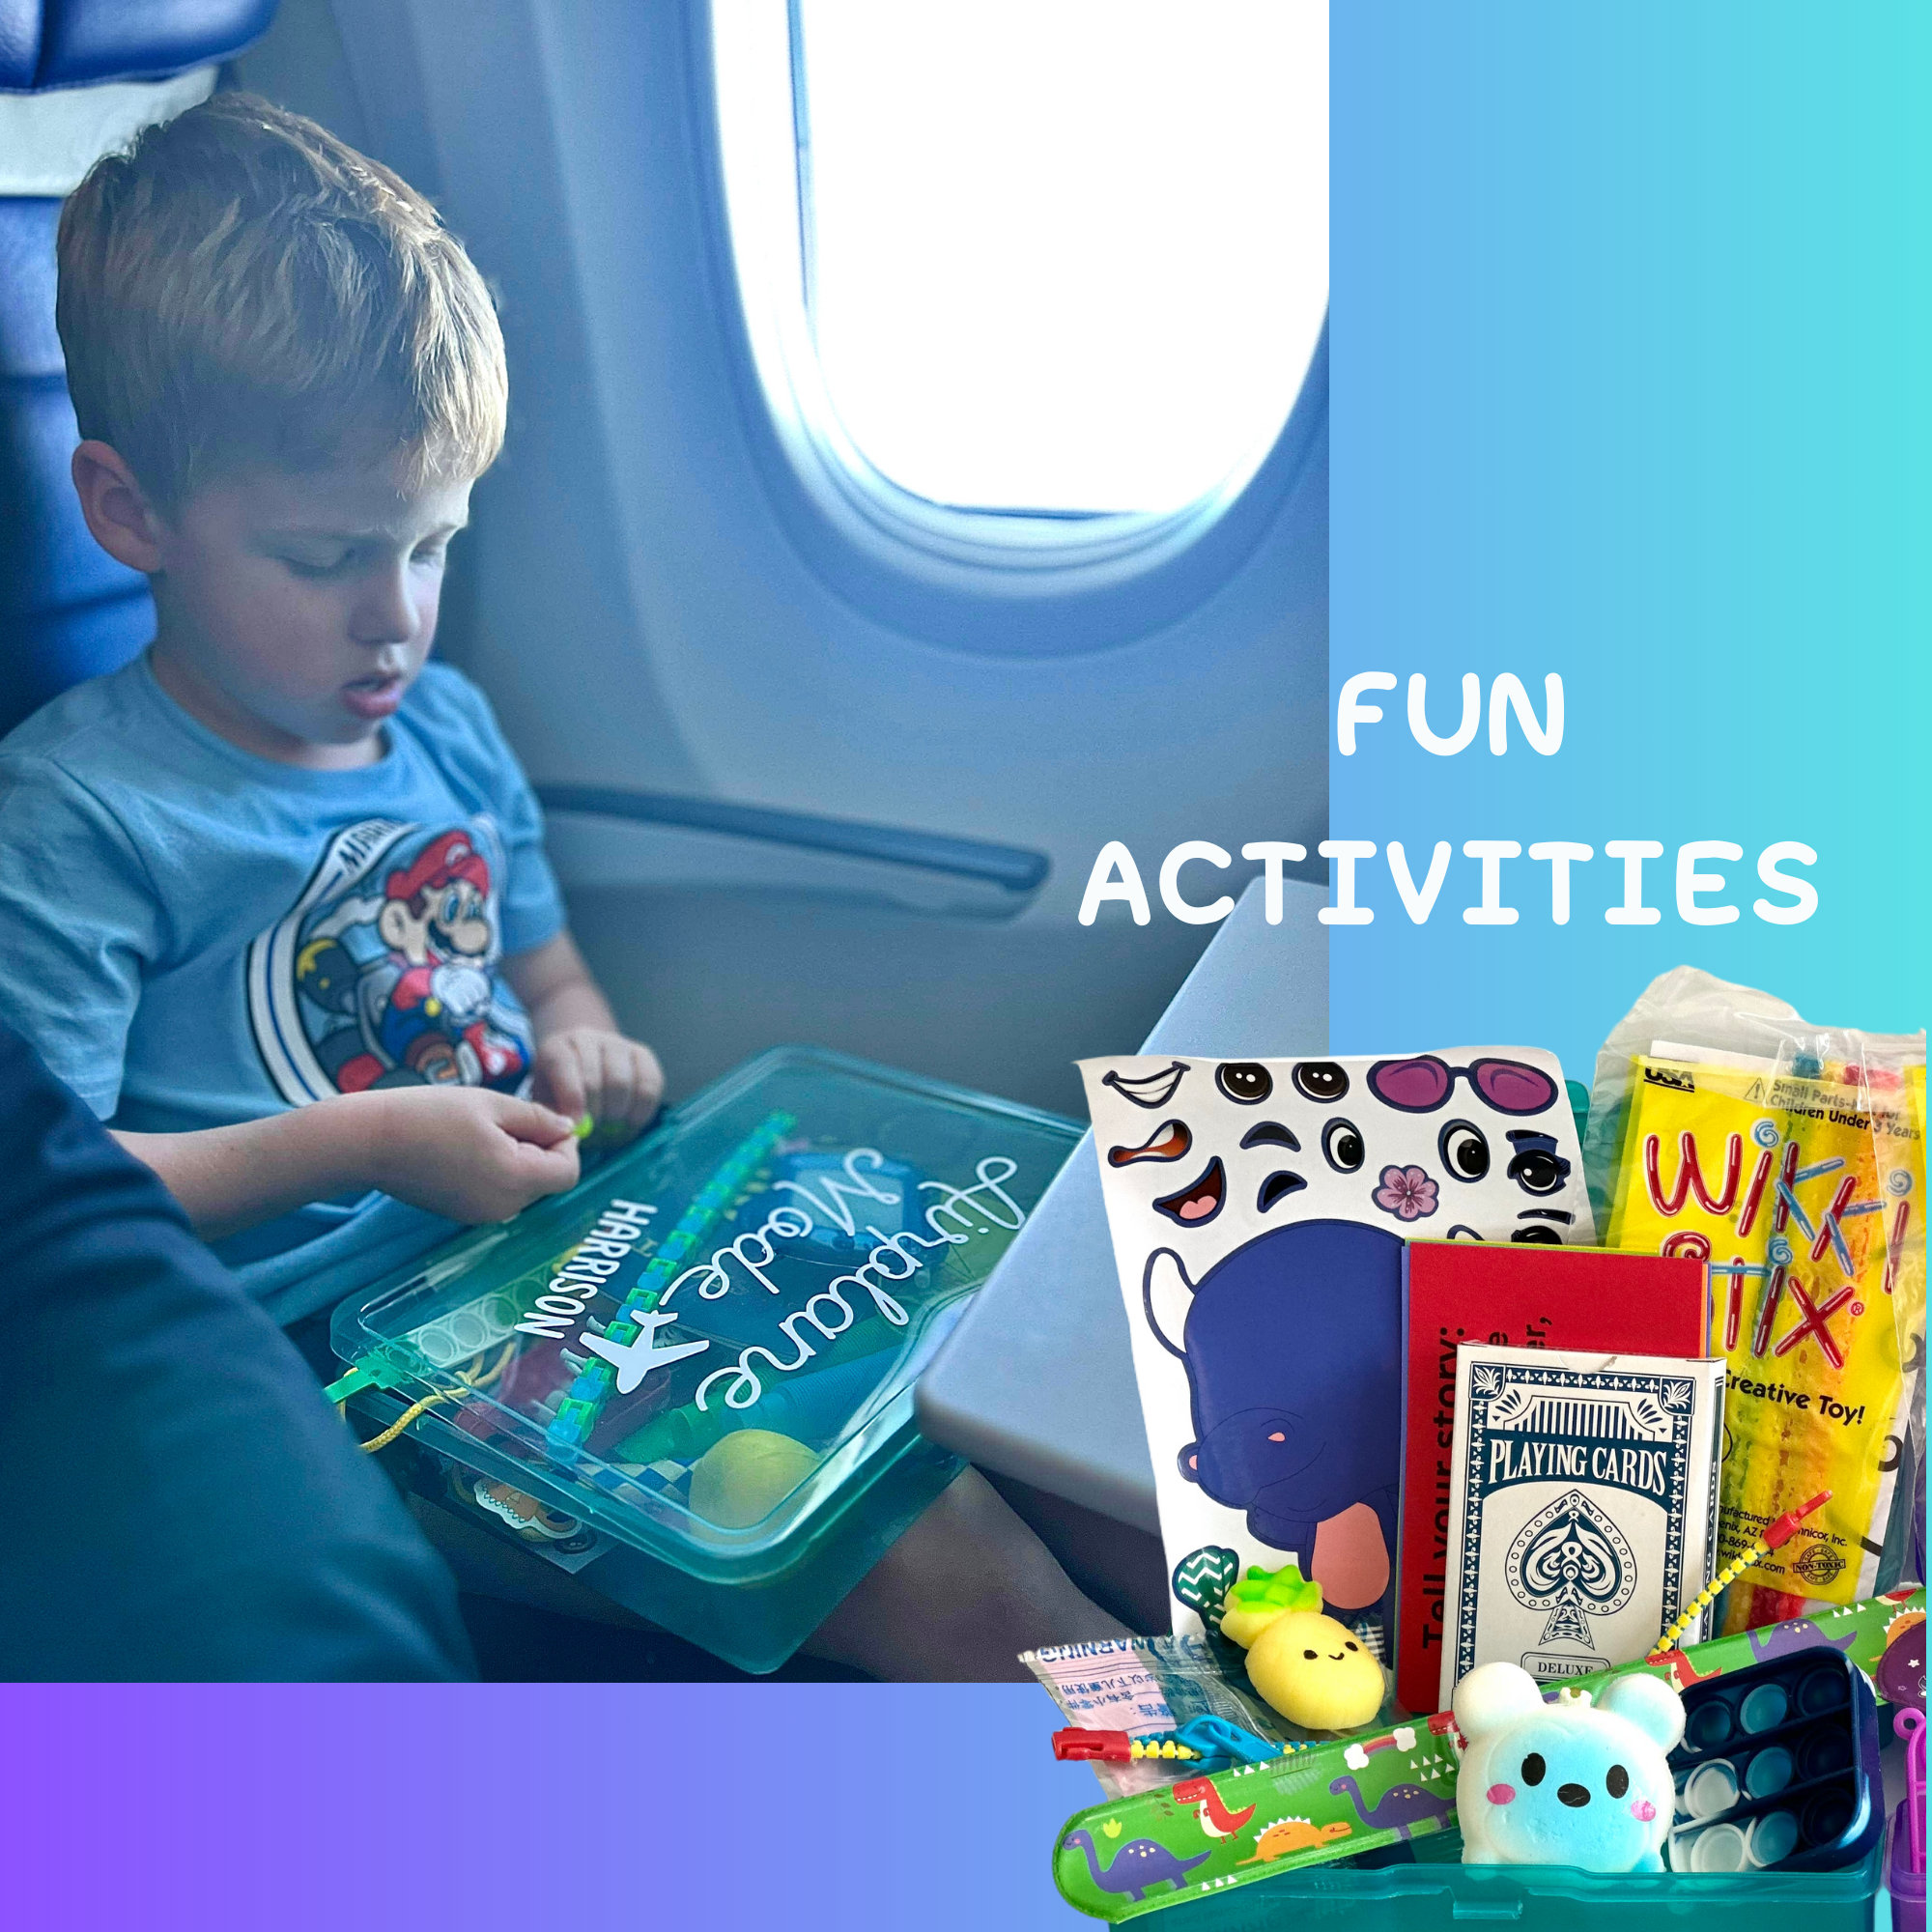 PRESCHOOL Travel Busy Box ages 3 Road Trip & Airplane Activities